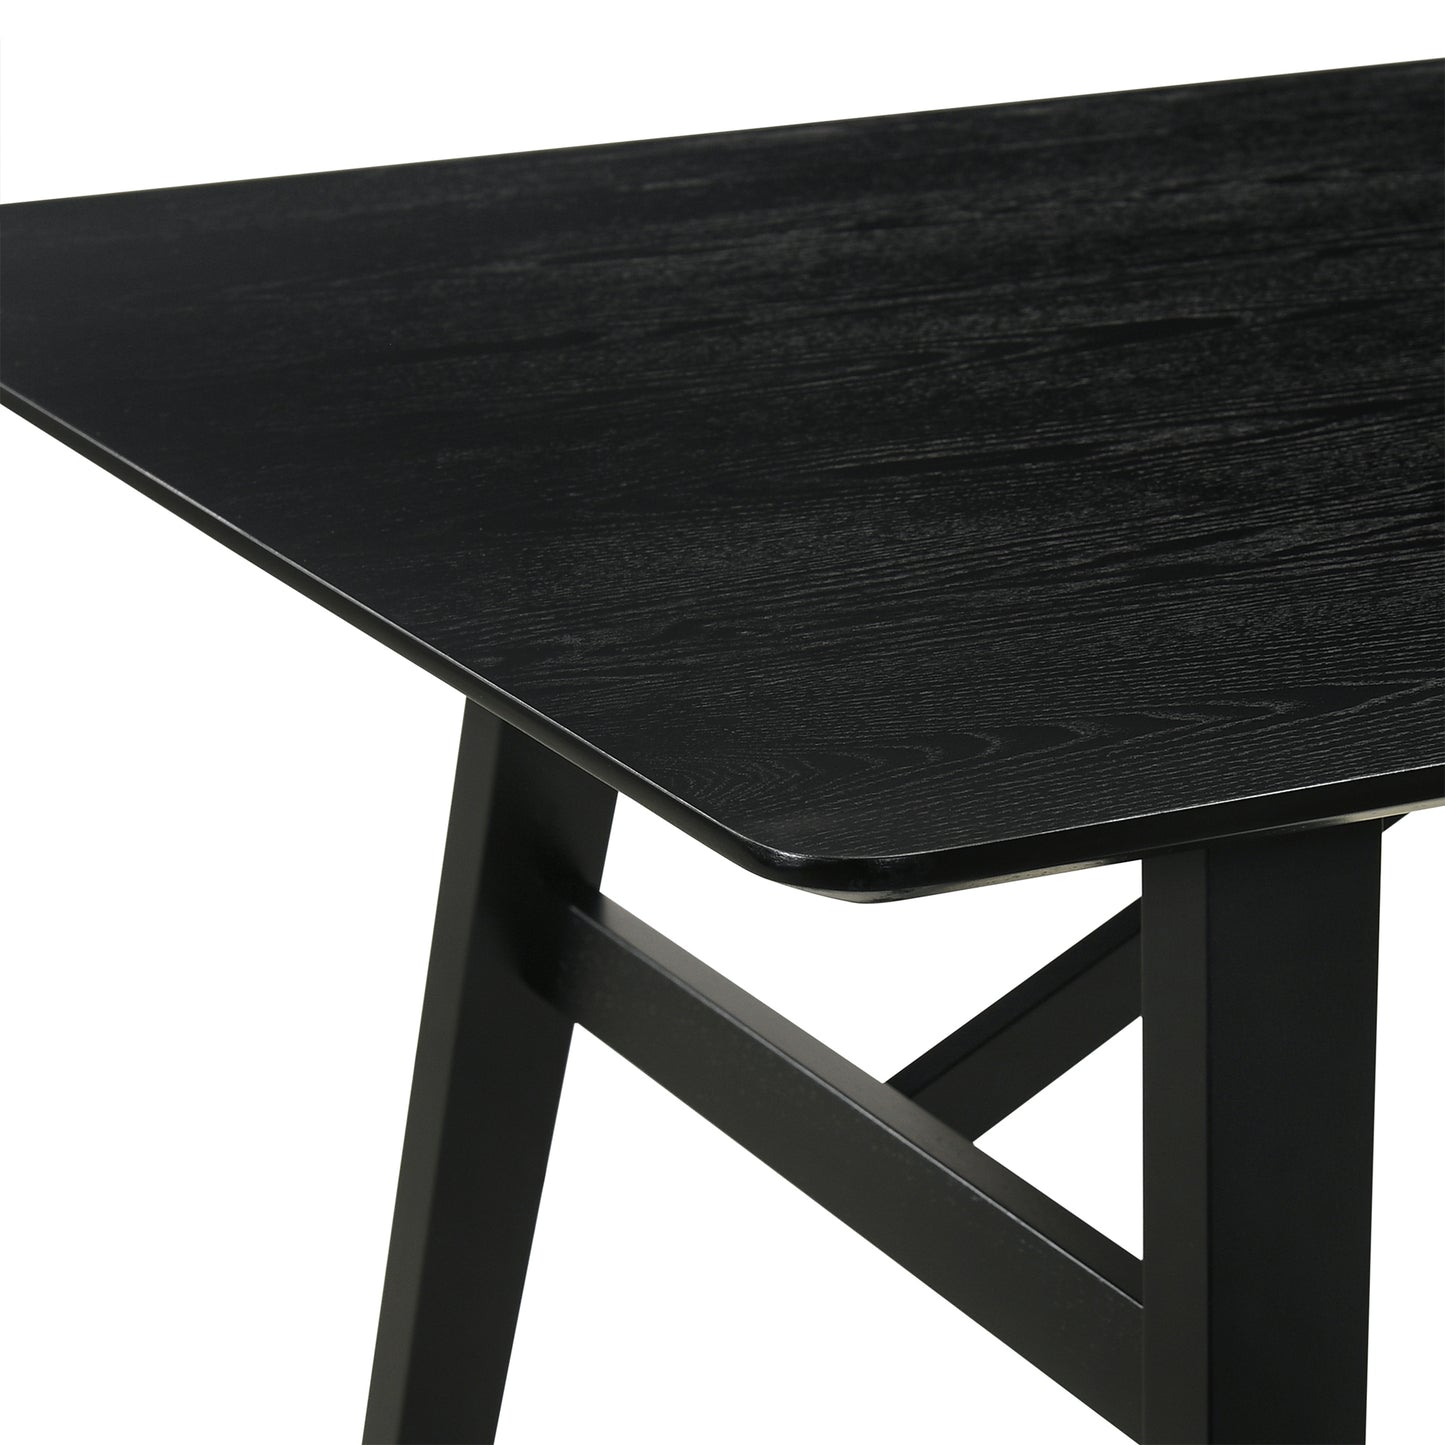 Channell 5 Piece Black Wood Dining Table Set with Charcoal Fabric